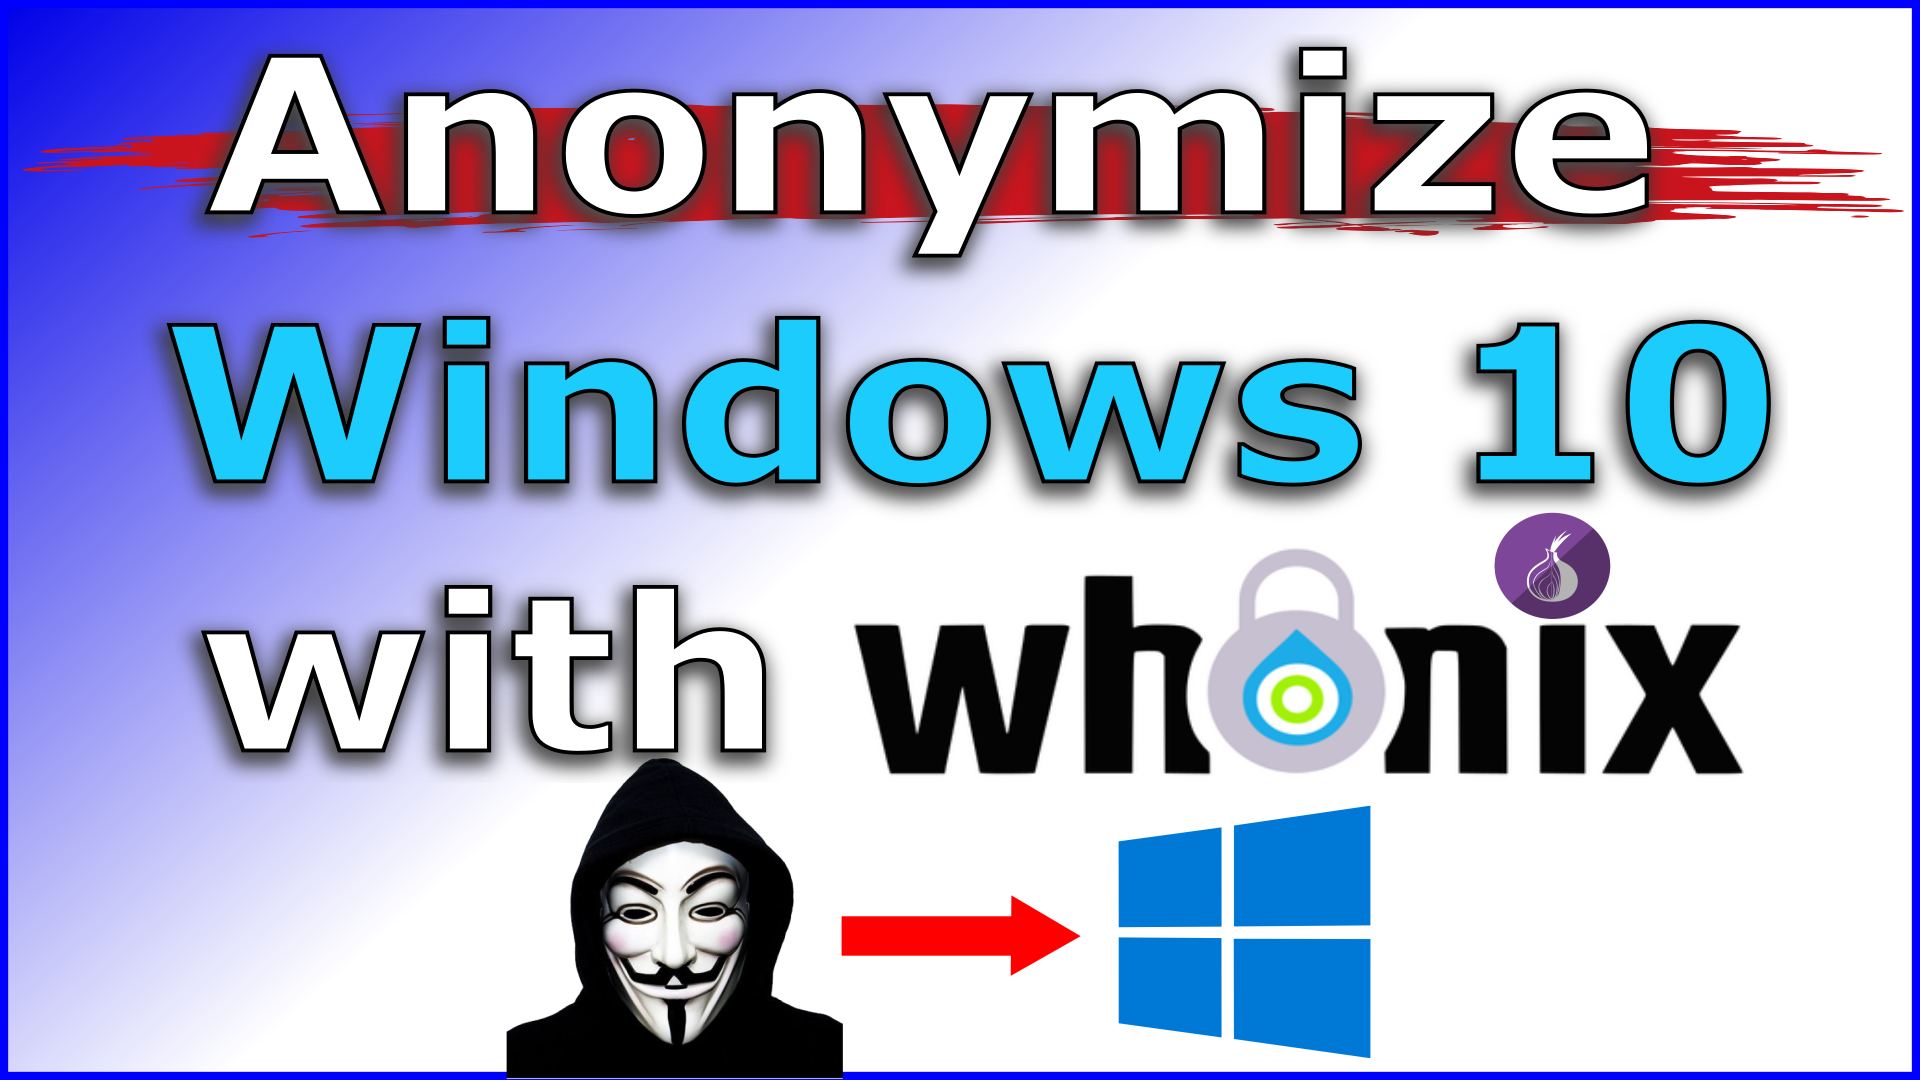 Anonymize Windows with Whonix